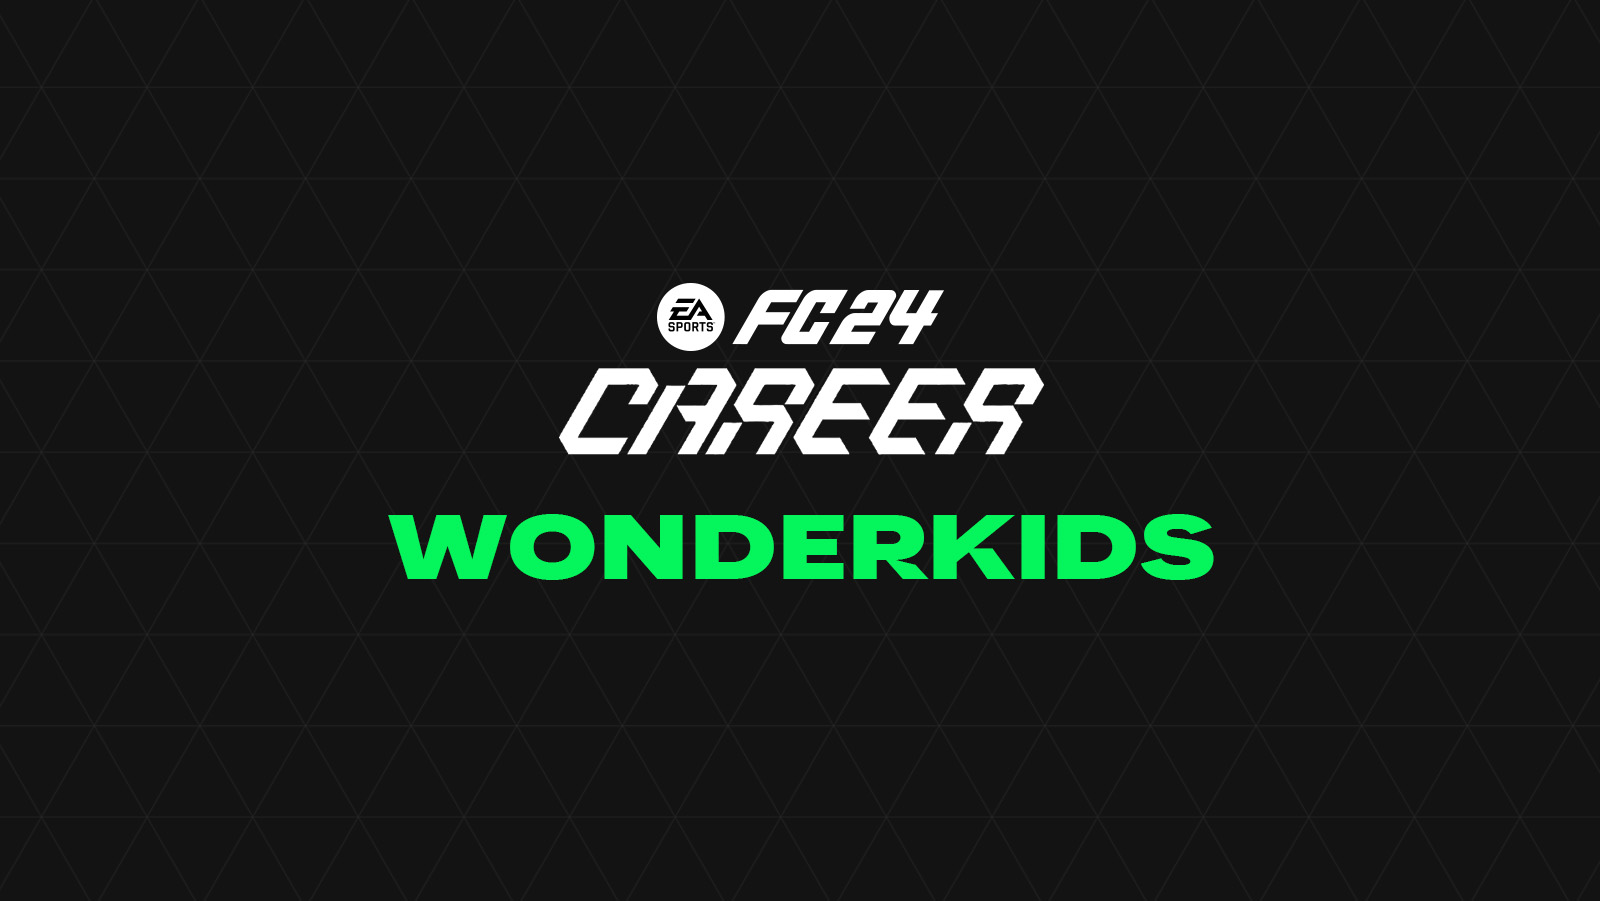 EA Sprots FC 24 Best Young Players (Wonderkids)